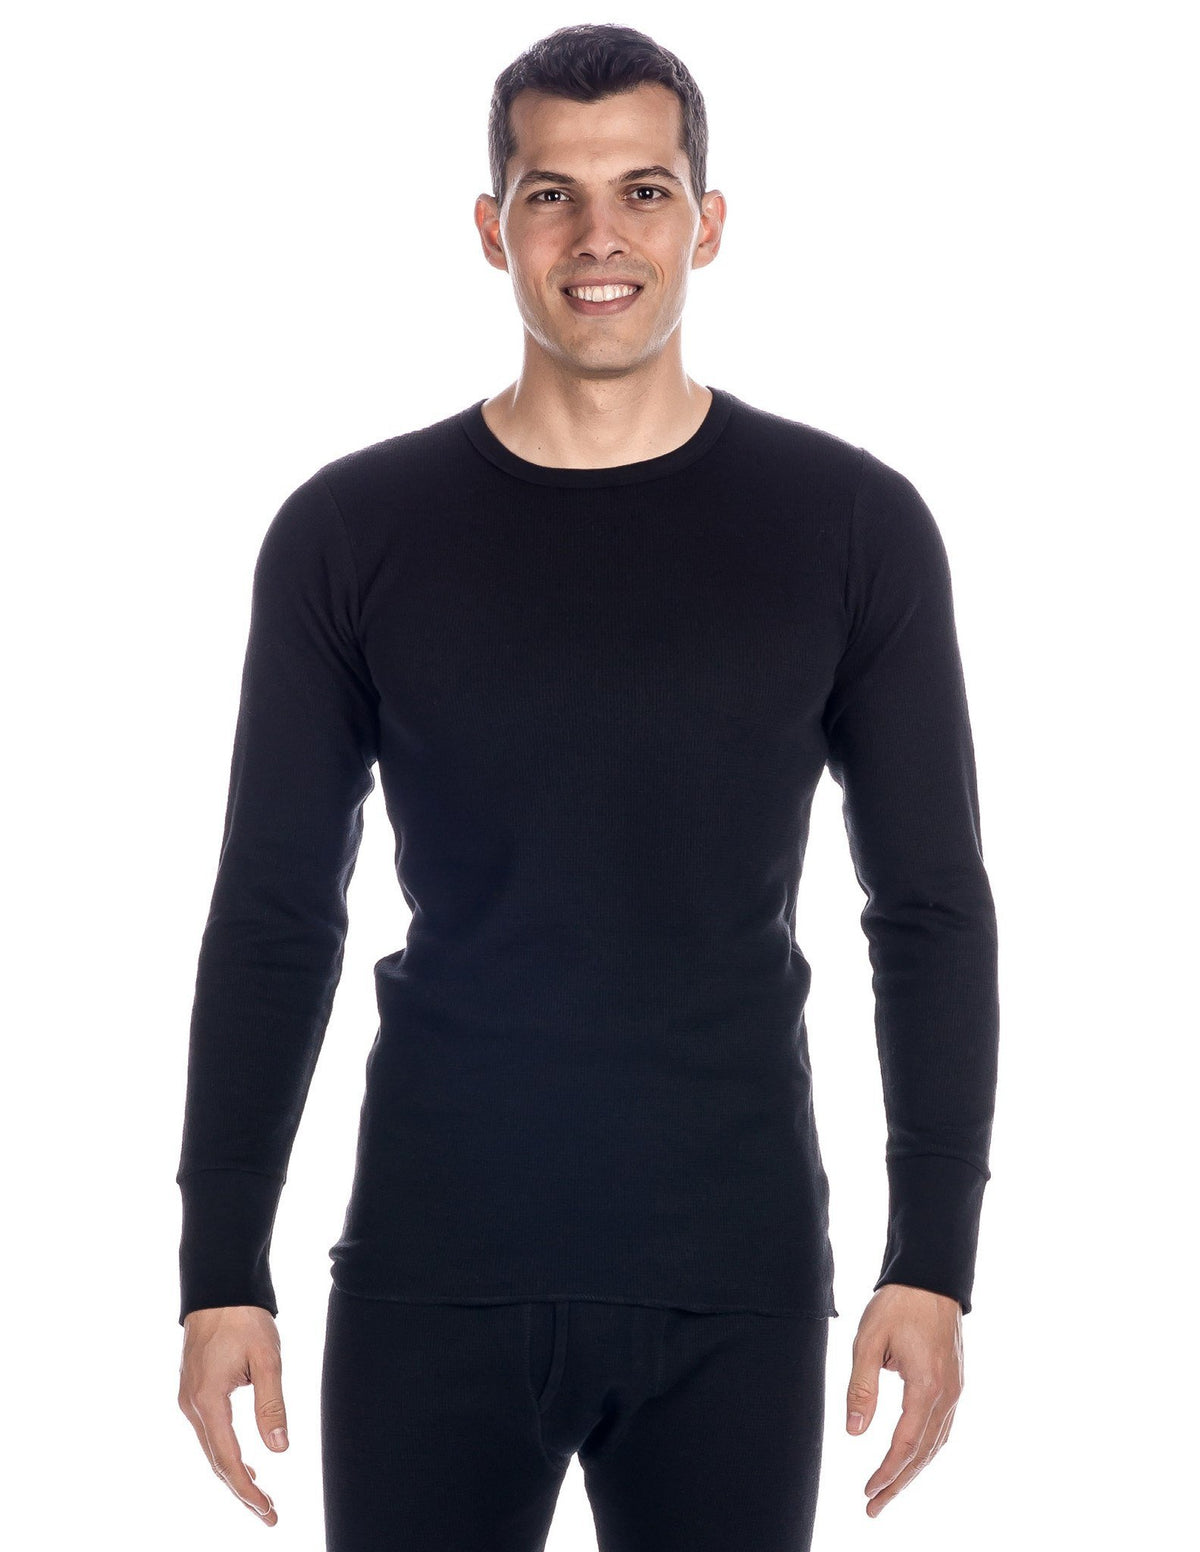 Men's Classic Waffle Knit Thermal Crew Top - Black